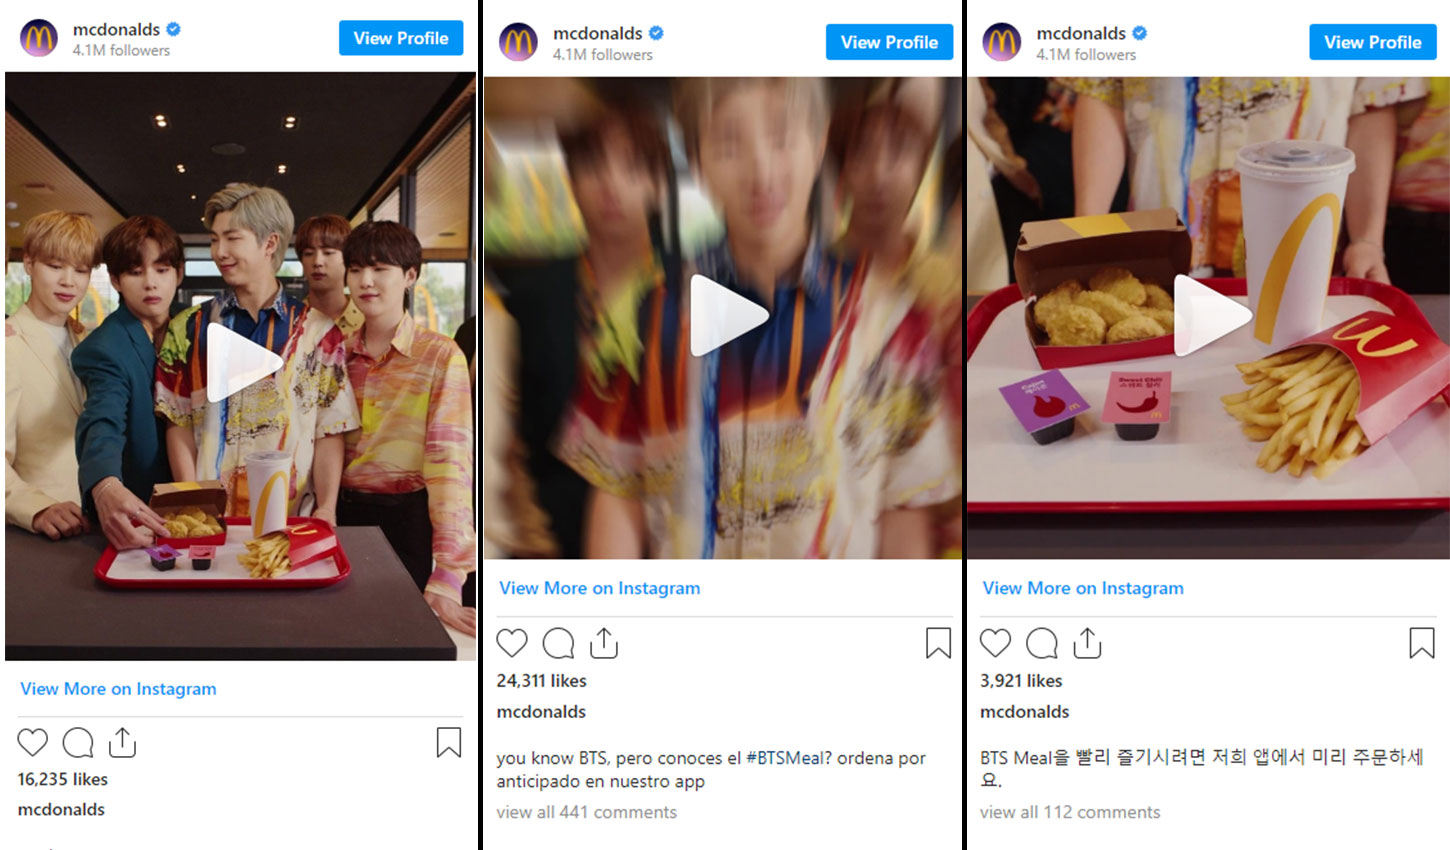 Ad Images for McDonald's BTS Meal